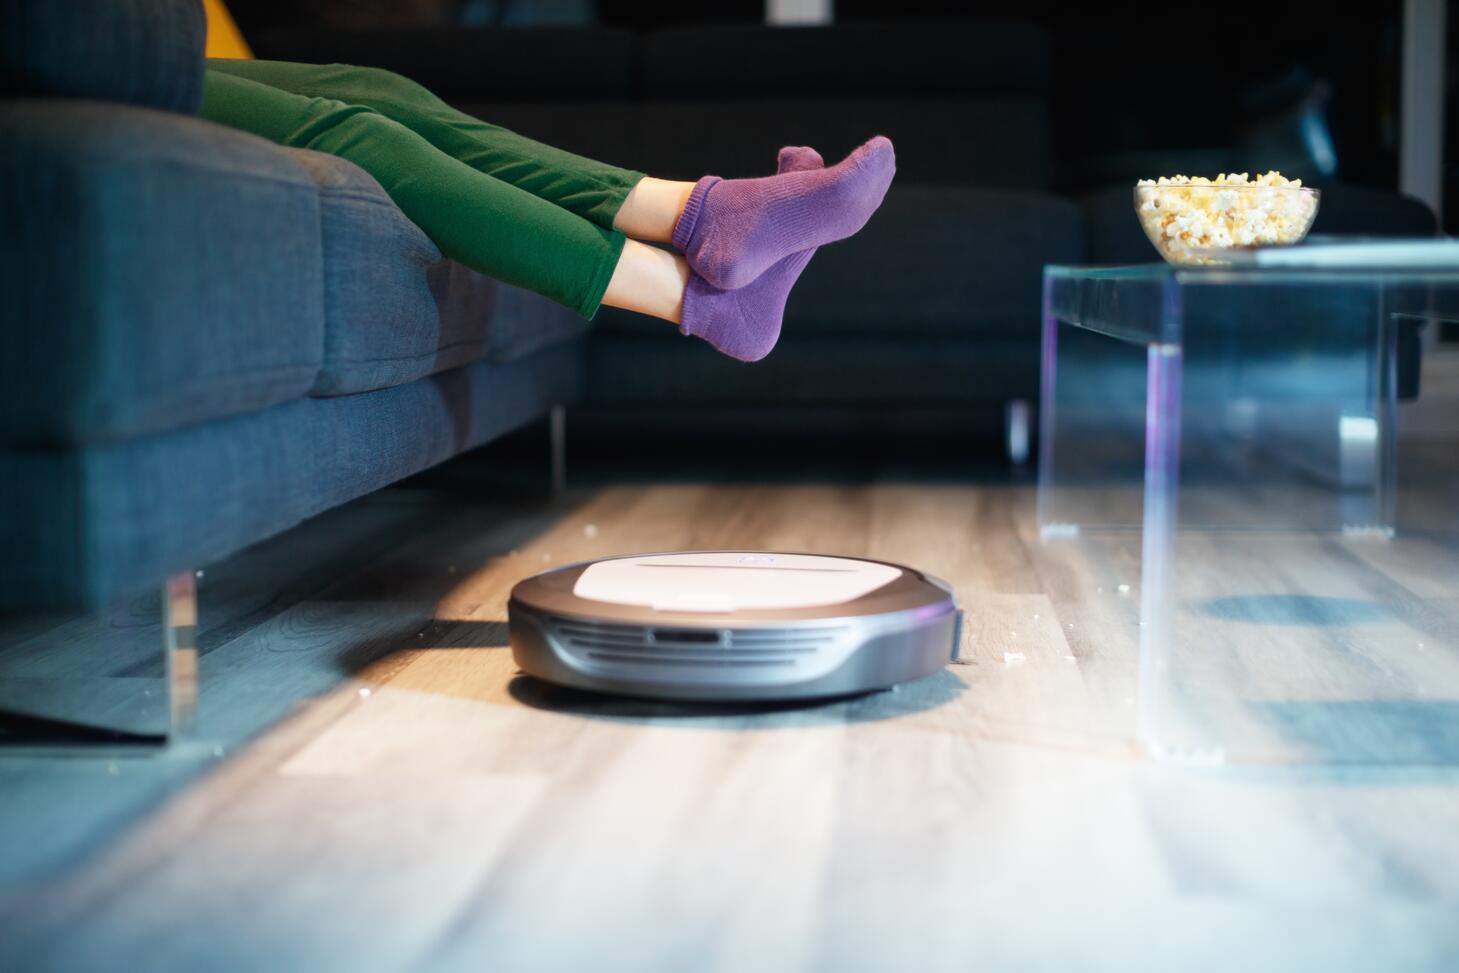 Someone lounges on a couch while a robot vacuum cleaner works